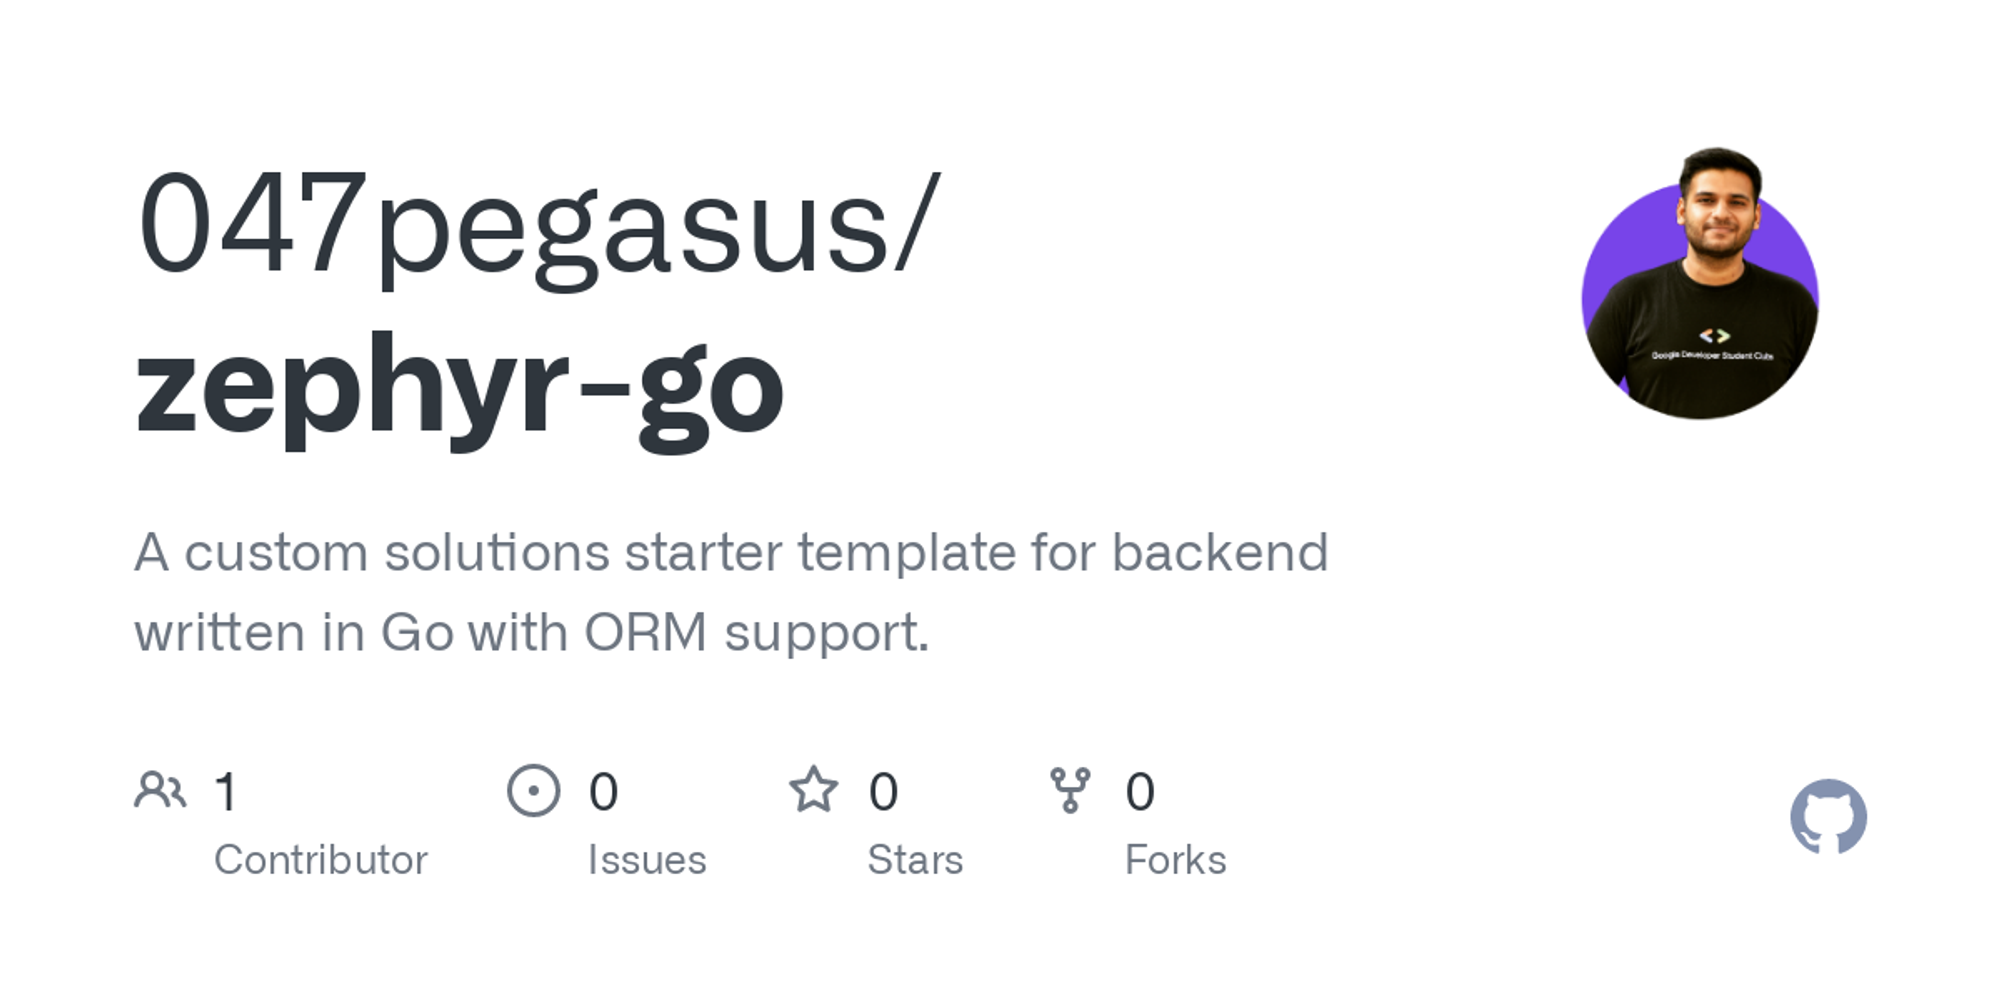 GitHub - 047pegasus/zephyr-go: A custom solutions starter template for backend written in Go with ORM support.